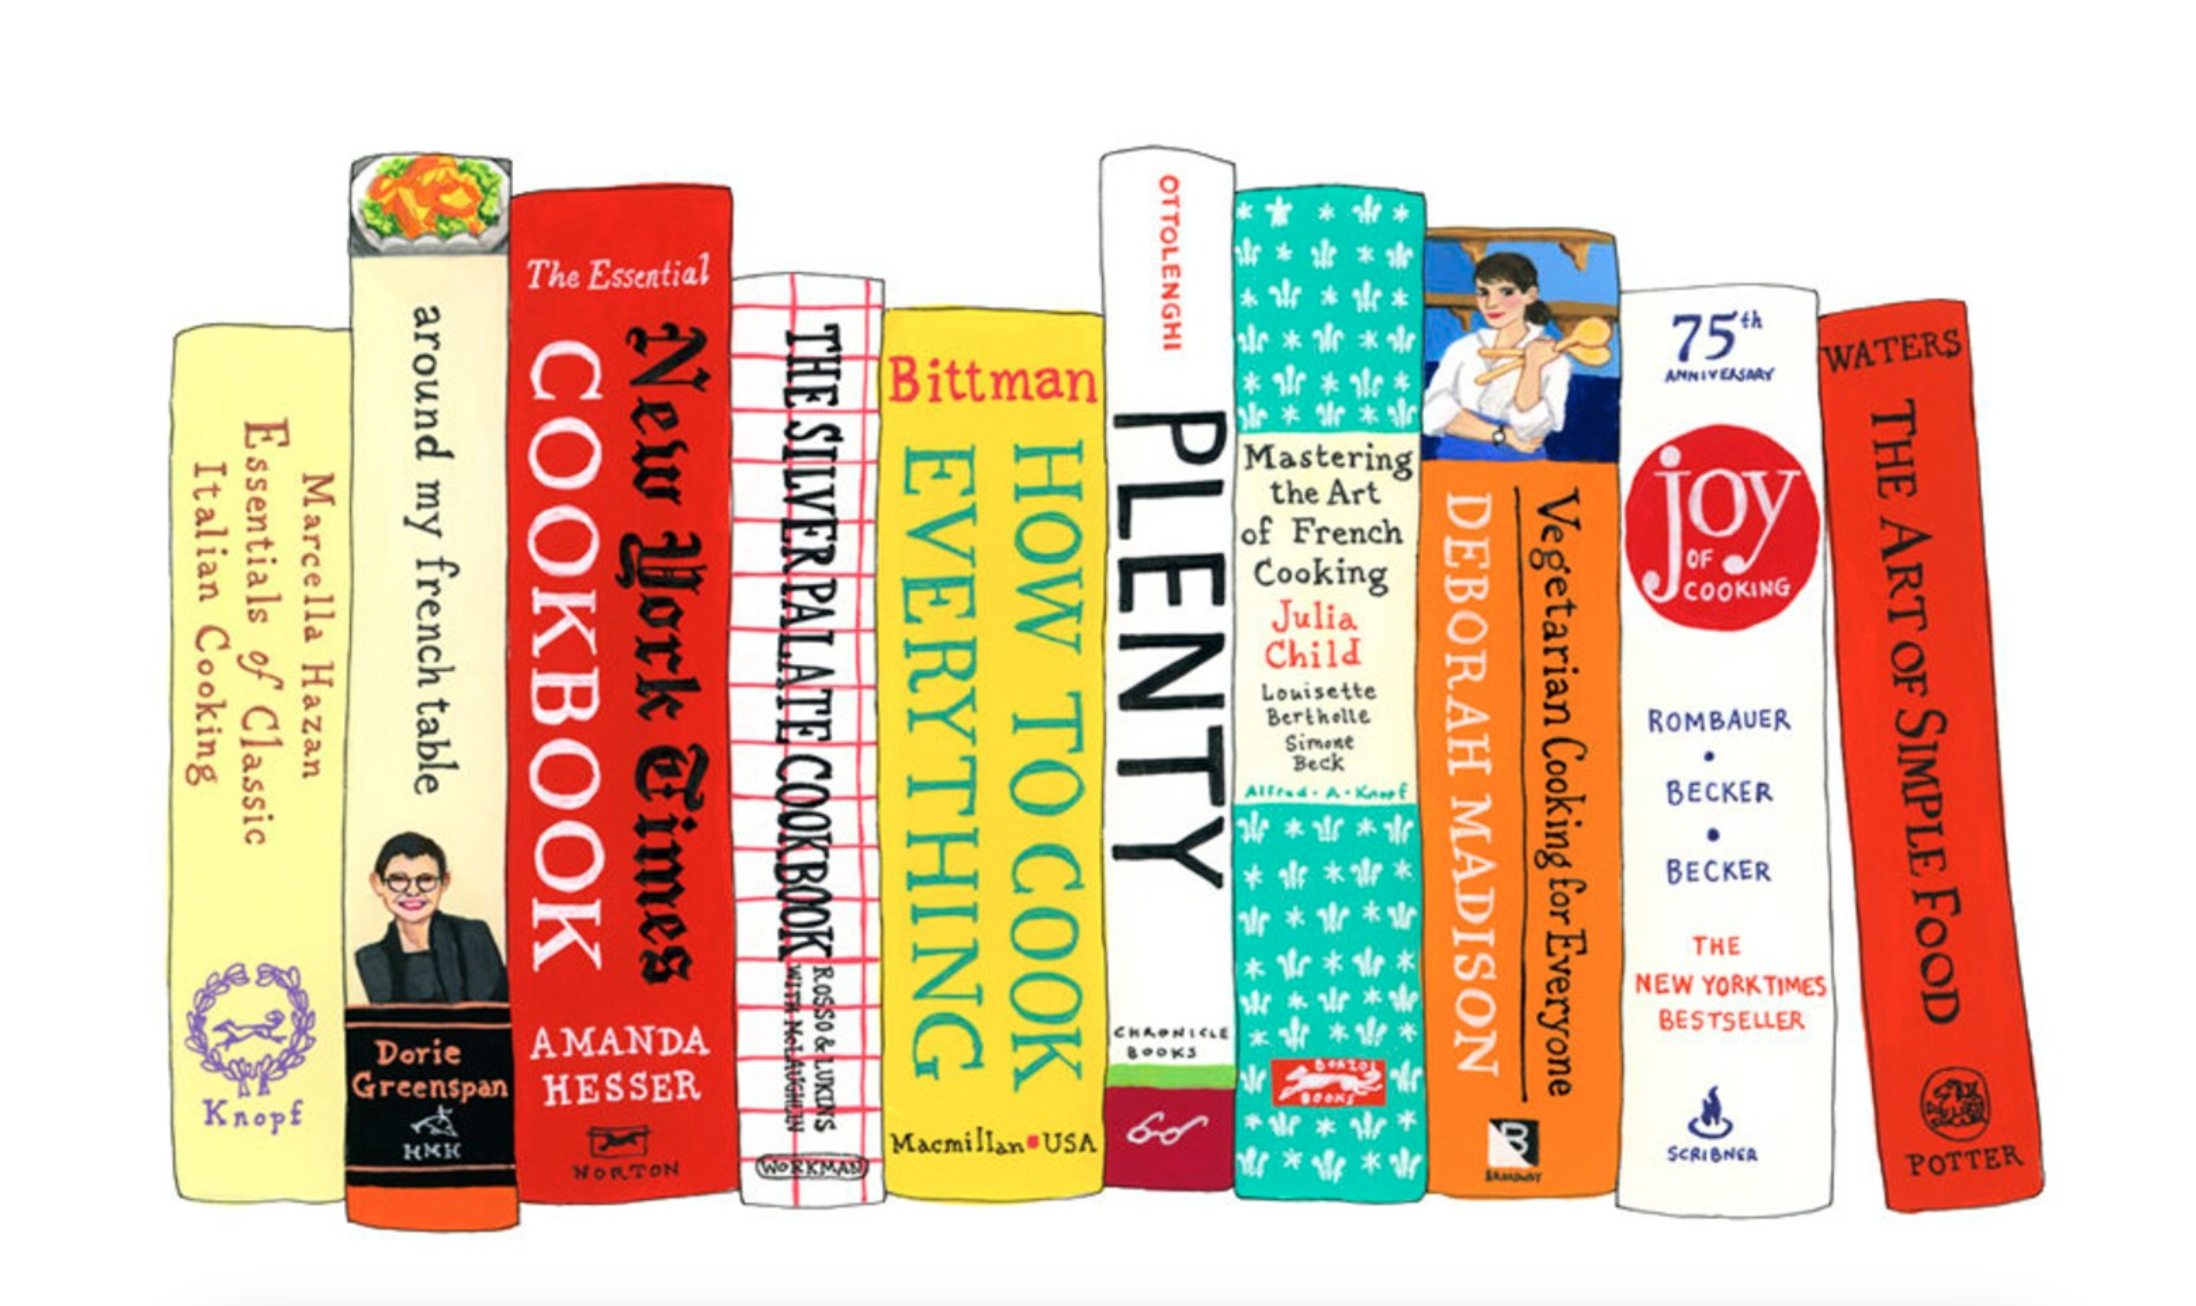 A illustrated print of a shelf of colorful cookbooks, spines out, drawn to look exactly like the spines of the actual cookbooks.